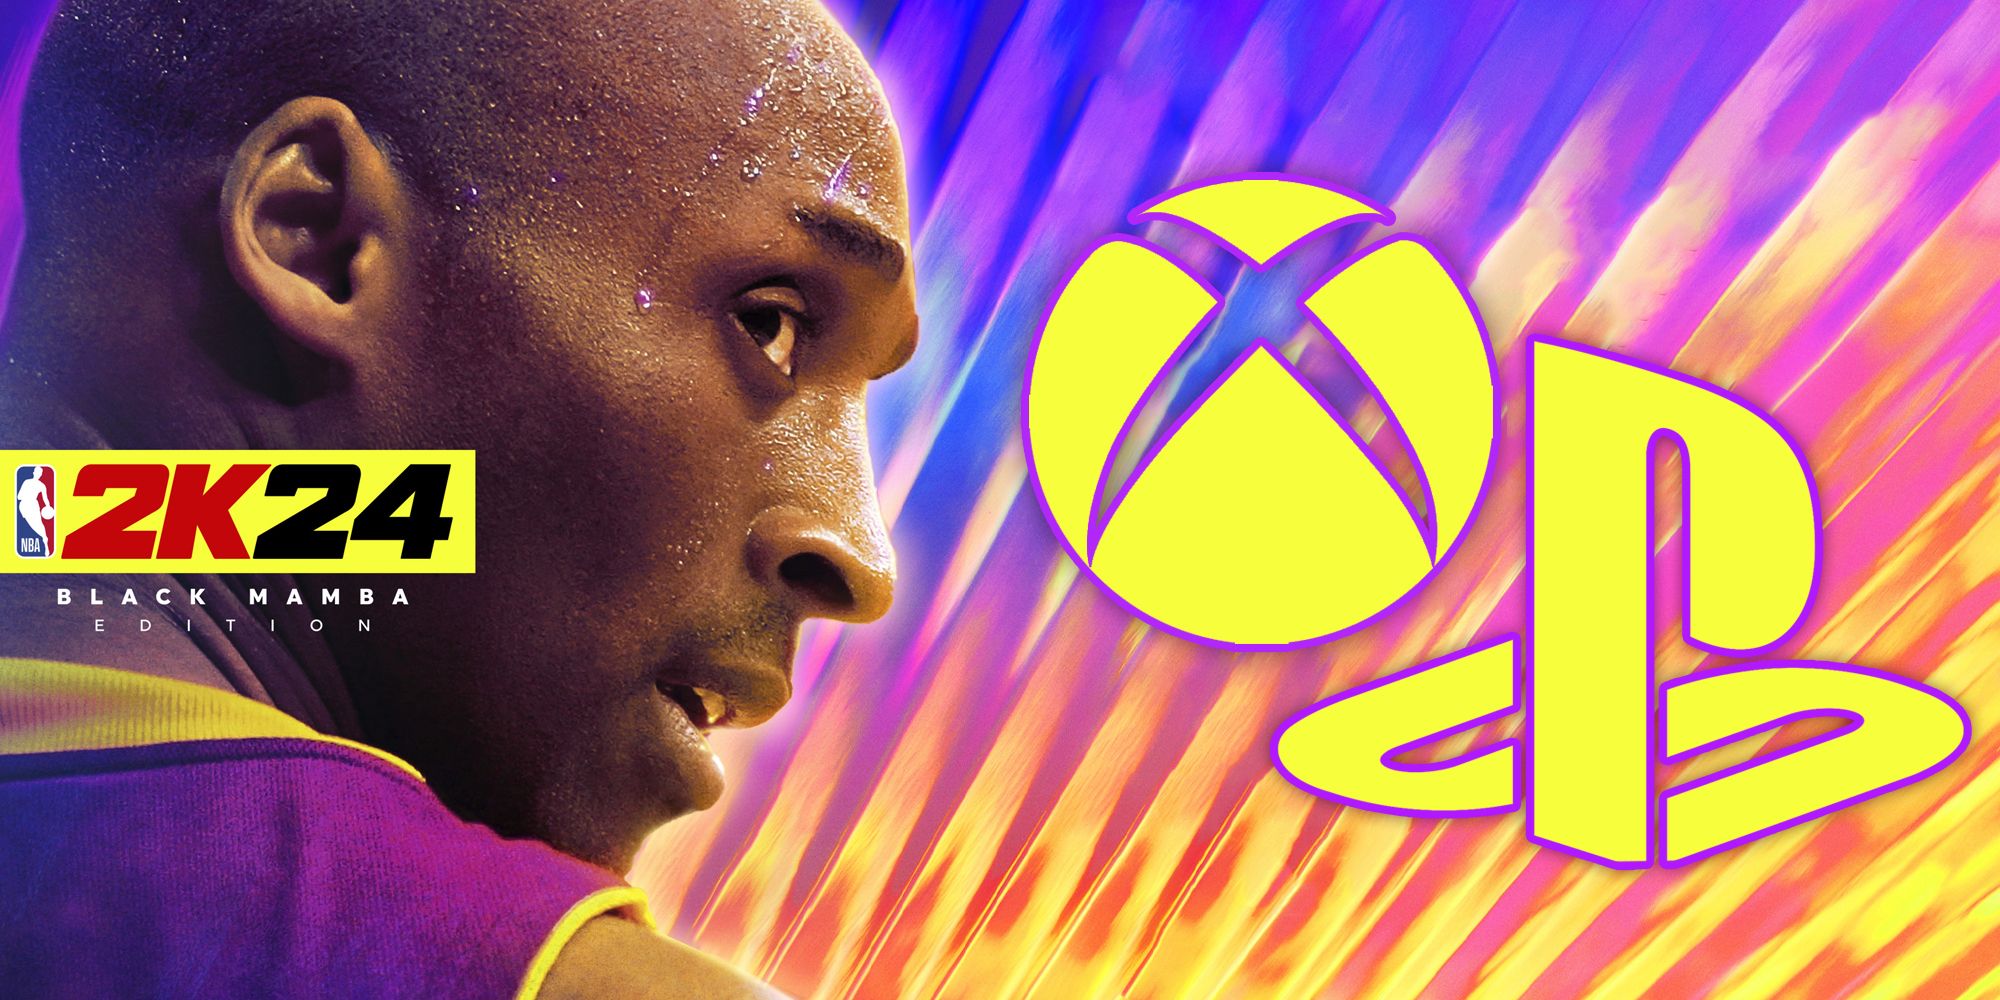 Kobe Bryant looking over his shoulder on the cover of NBA 2K24 Black Mamba Edition next to purple and gold Xbox and PlayStation logos.